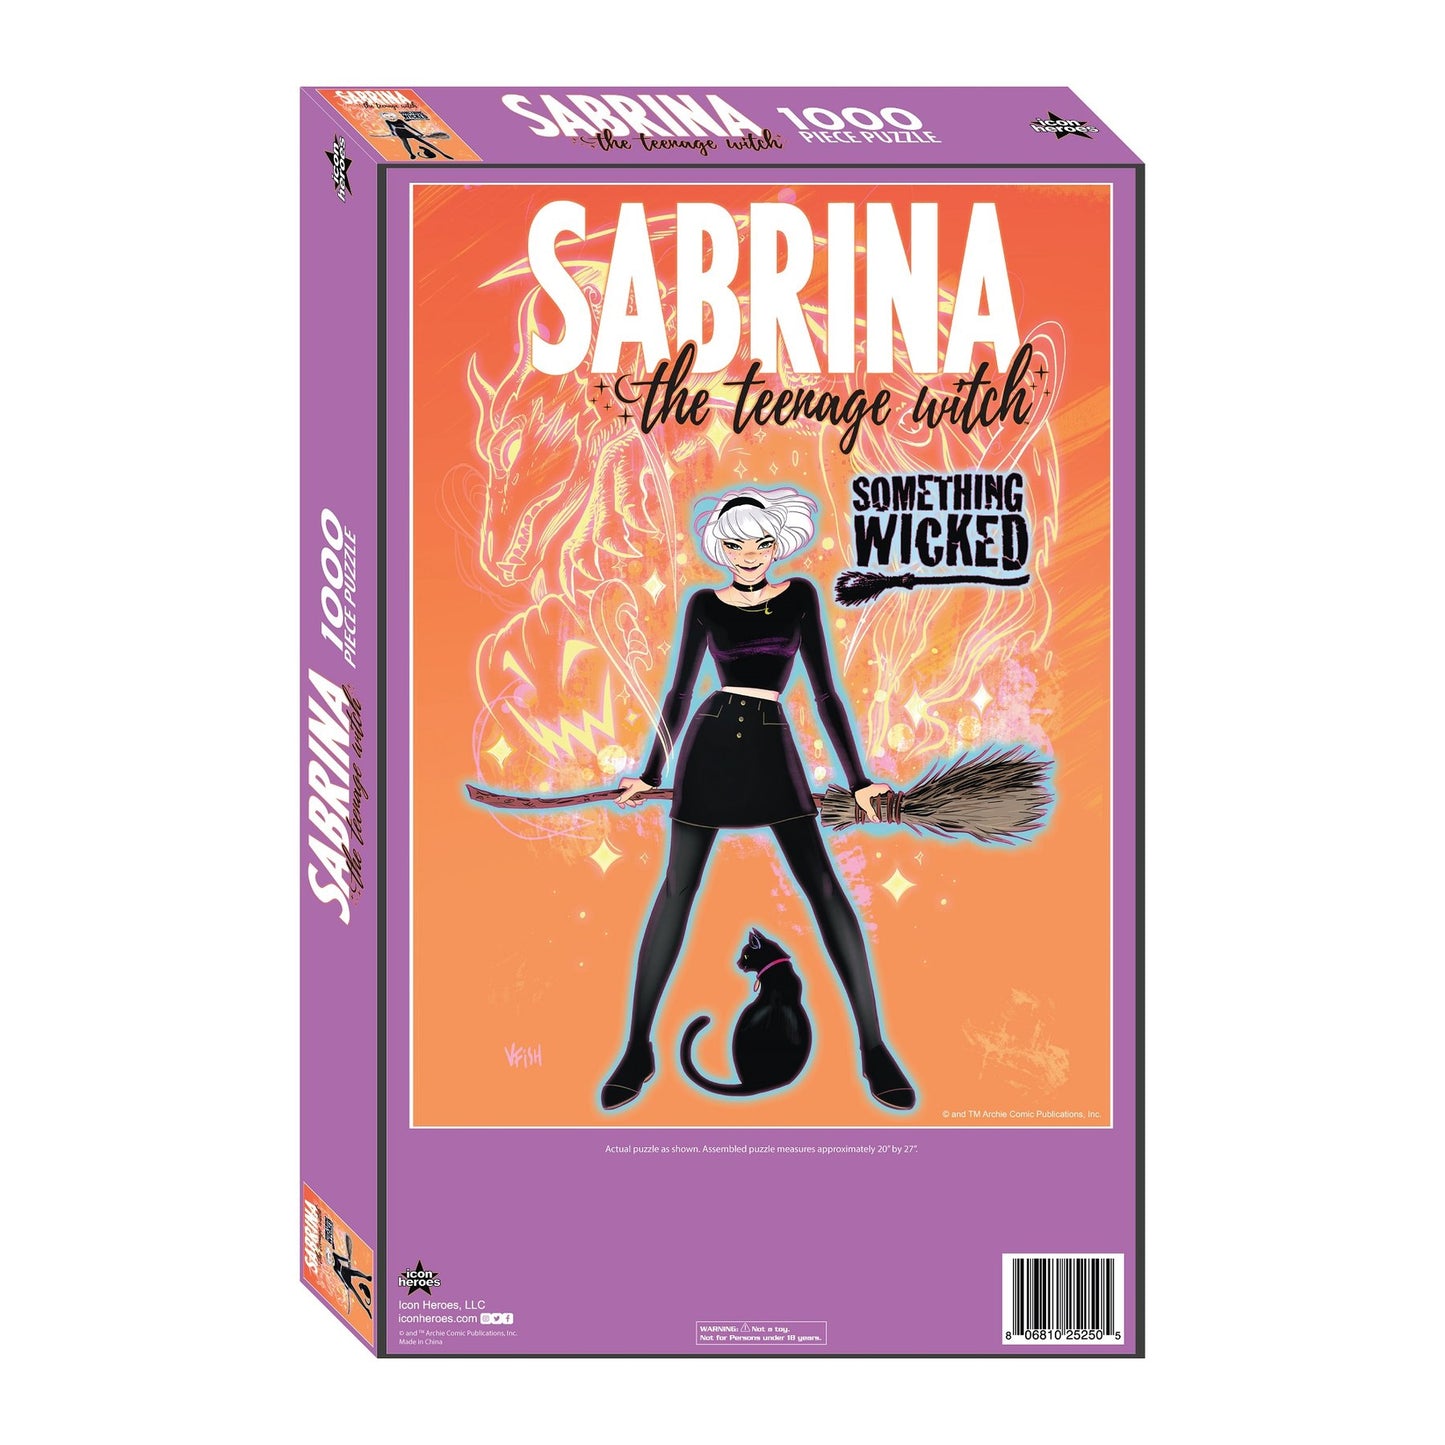 Sabrina The Teenage Witch 1000 Piece Puzzle - Puzzle - The Hooded Goblin